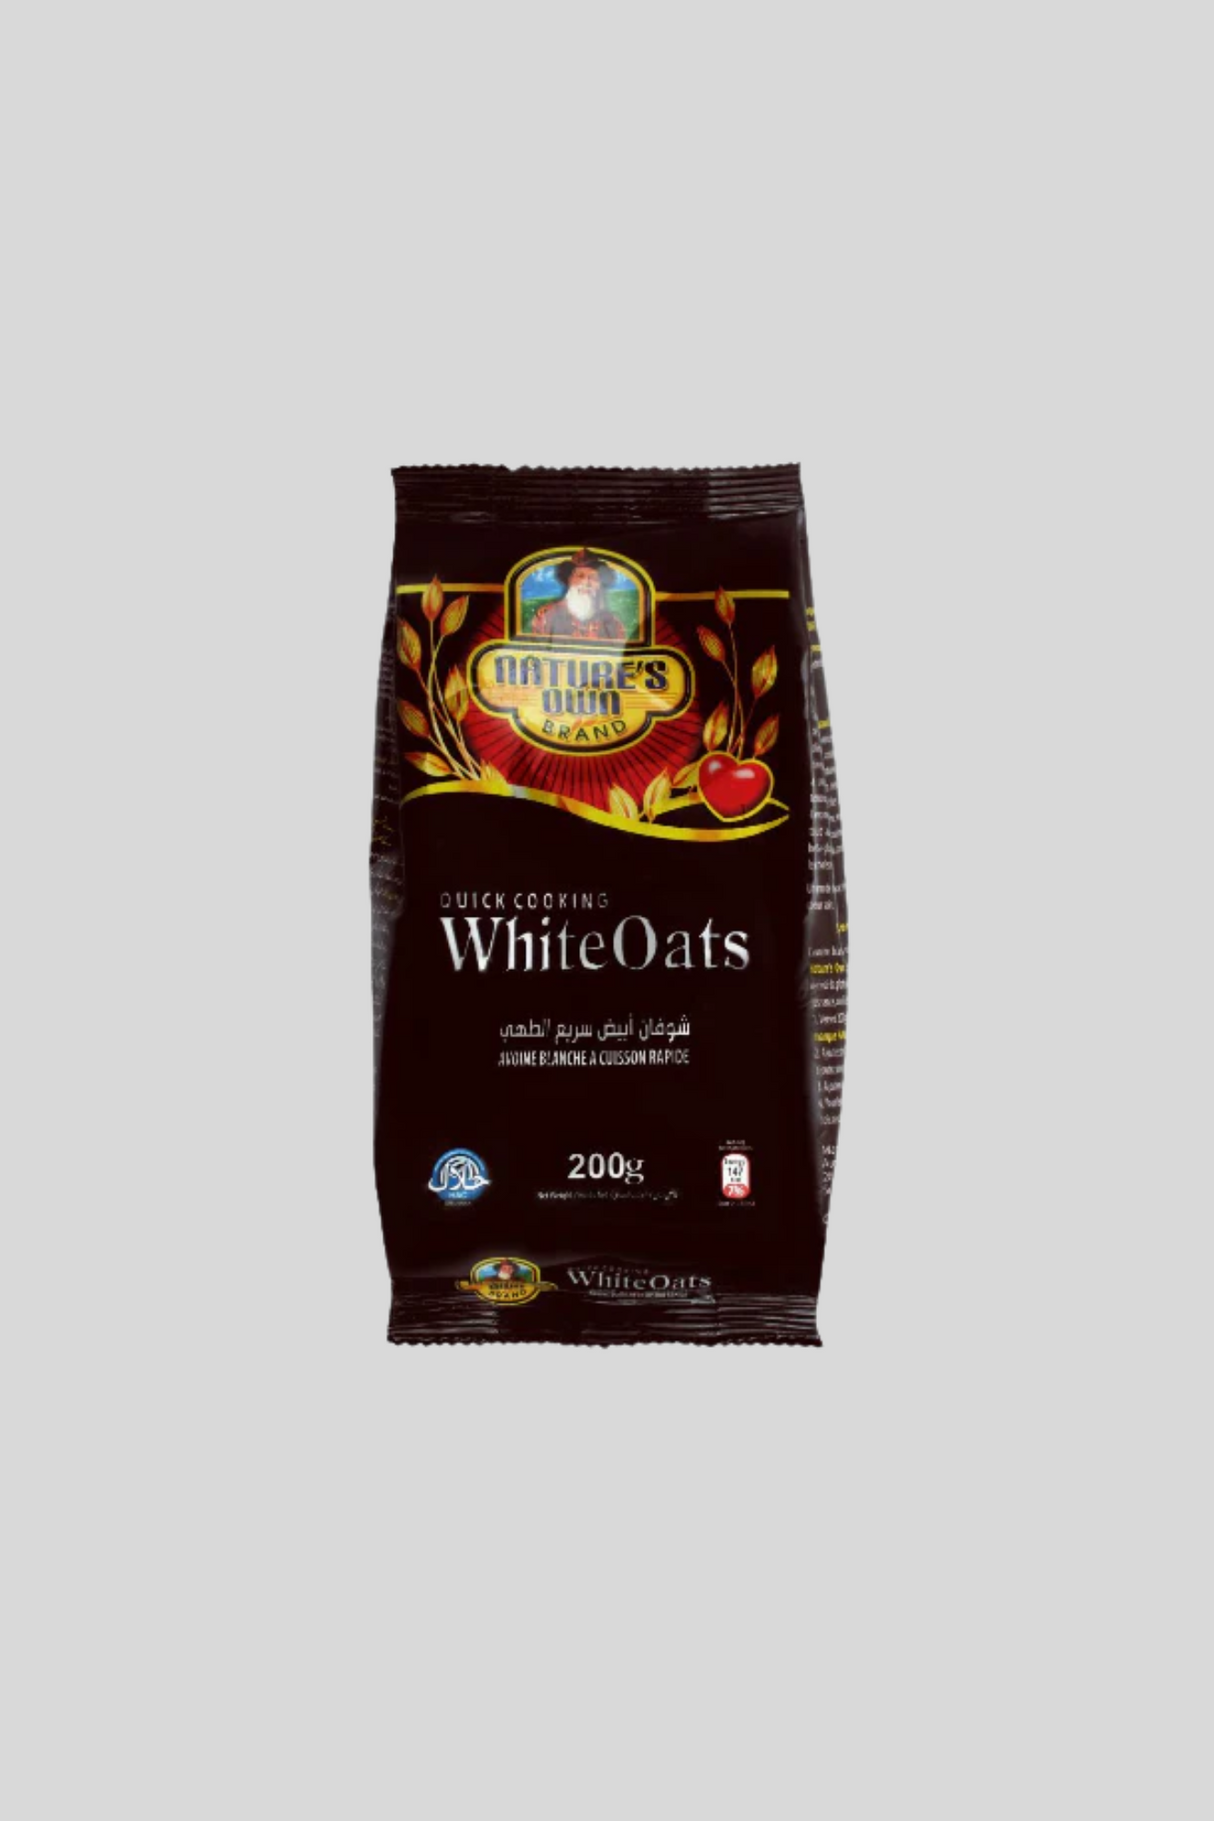 natures own white oats 200g